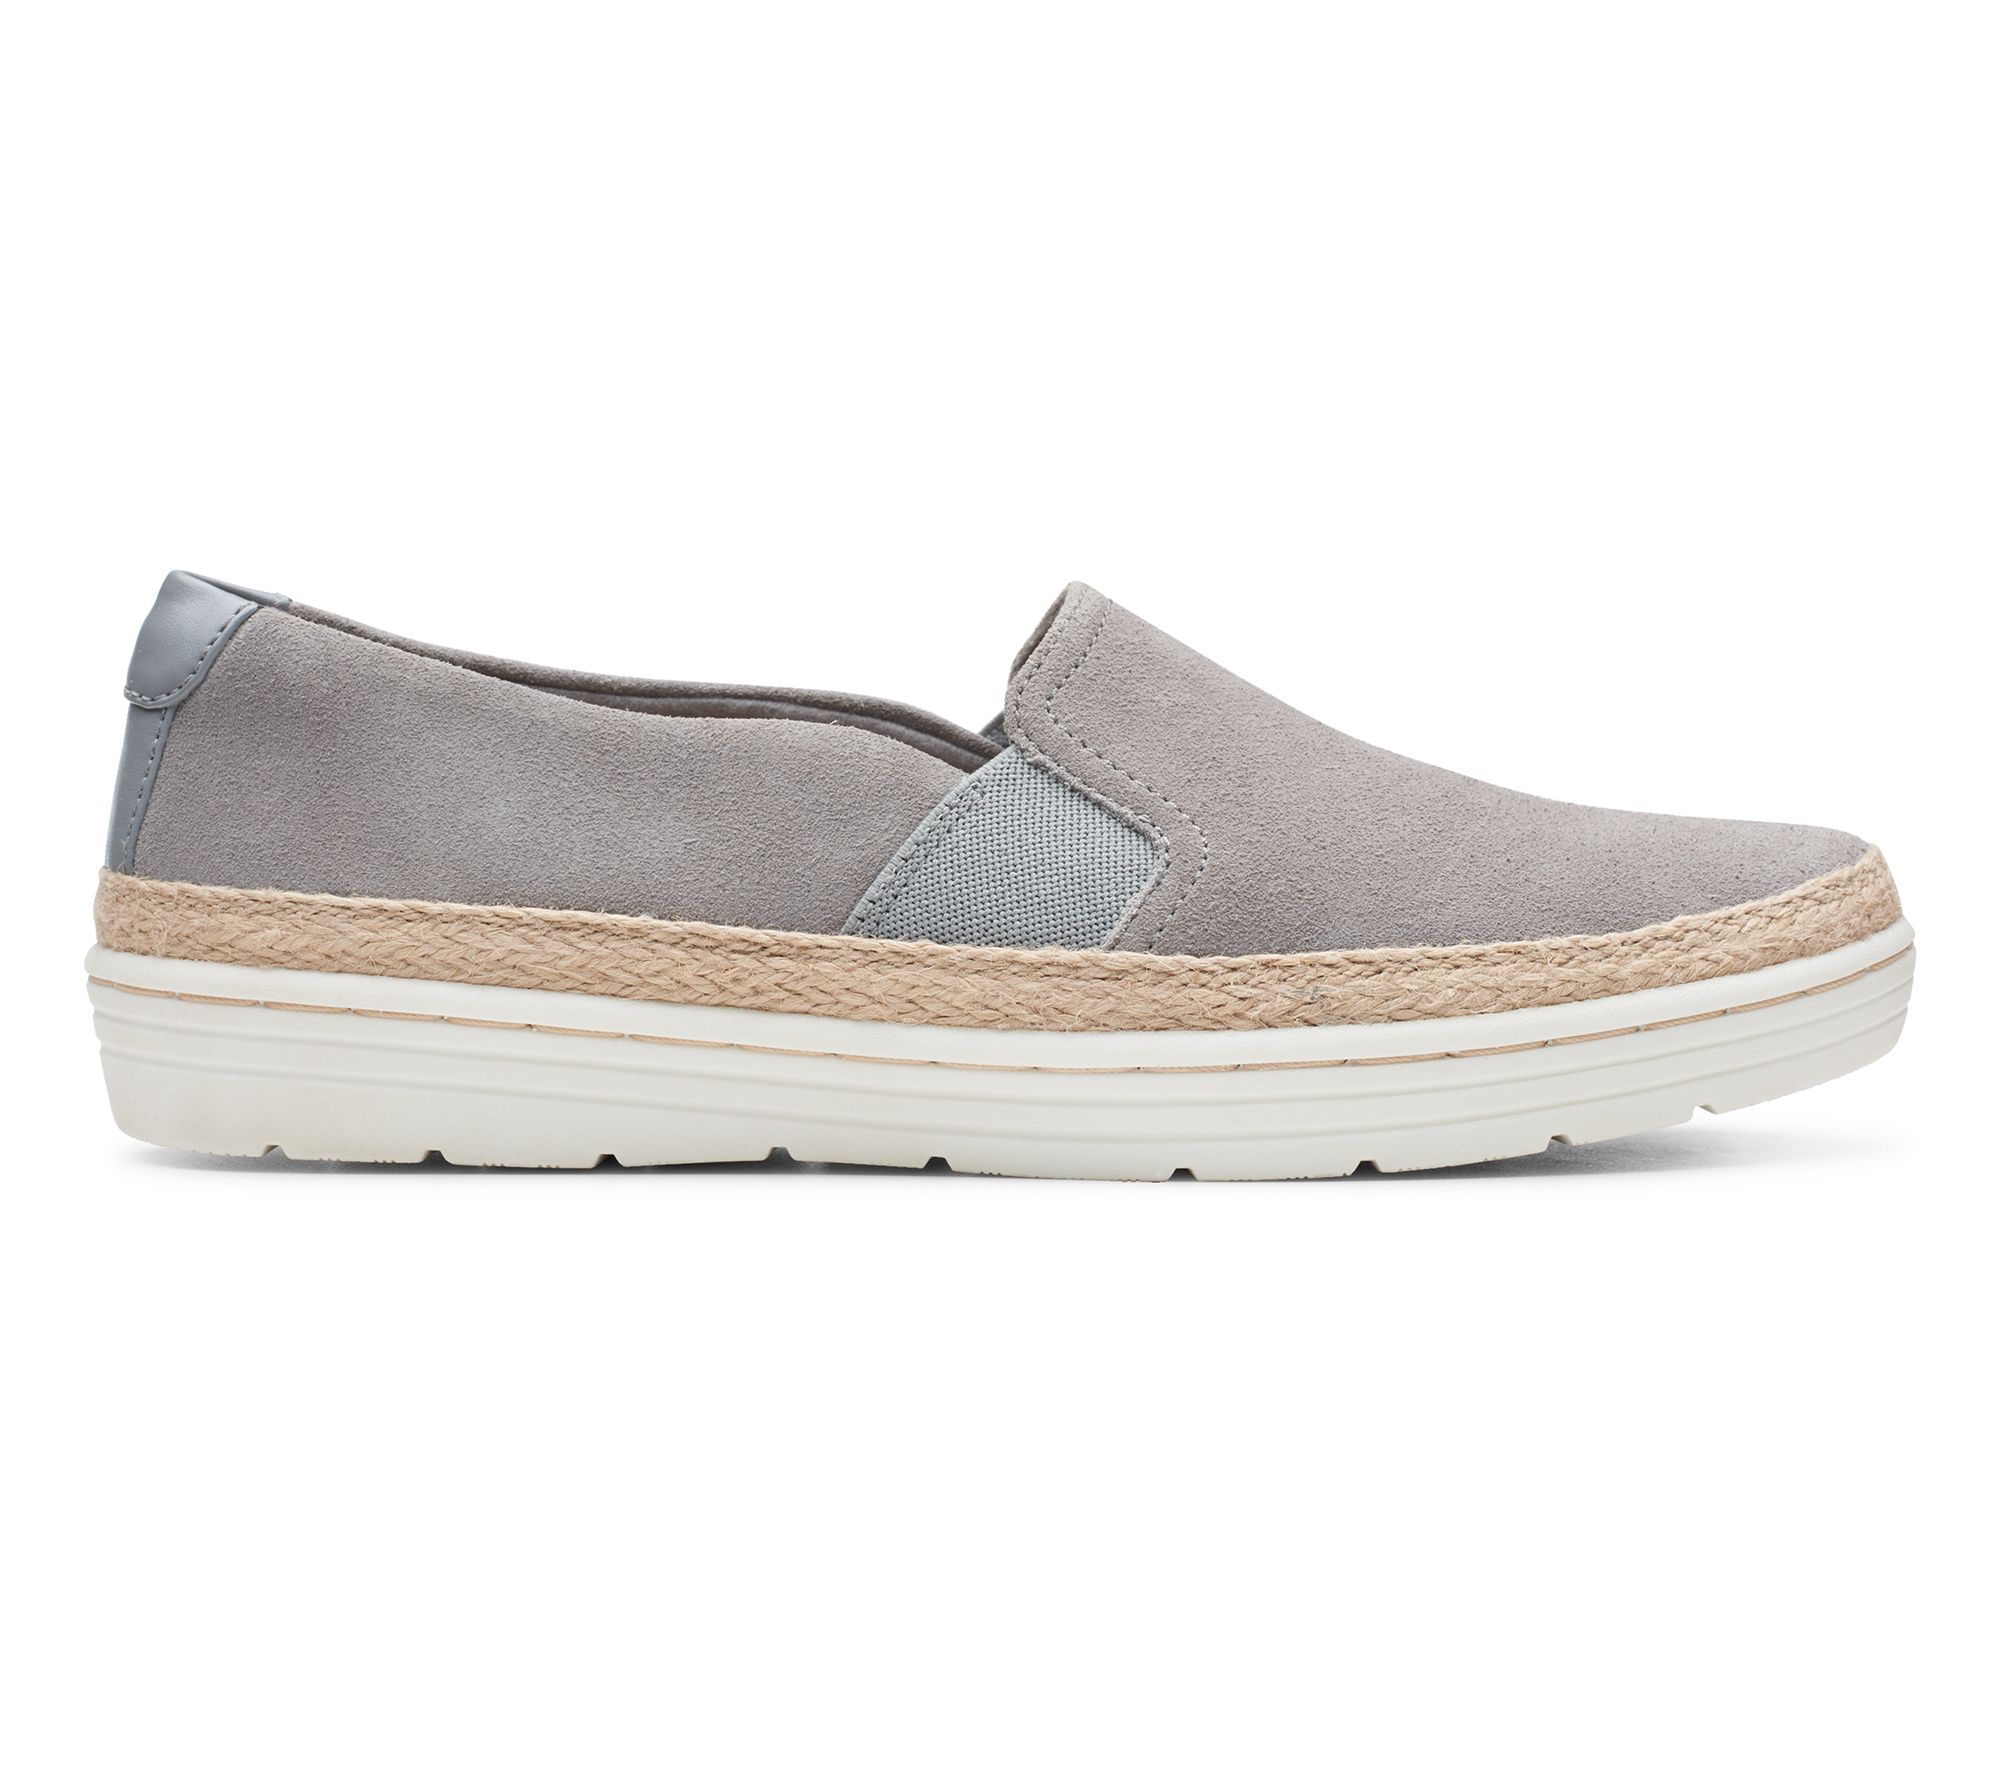 Clarks Collection Leather Slip-On Shoes - Marie Sail - QVC.com